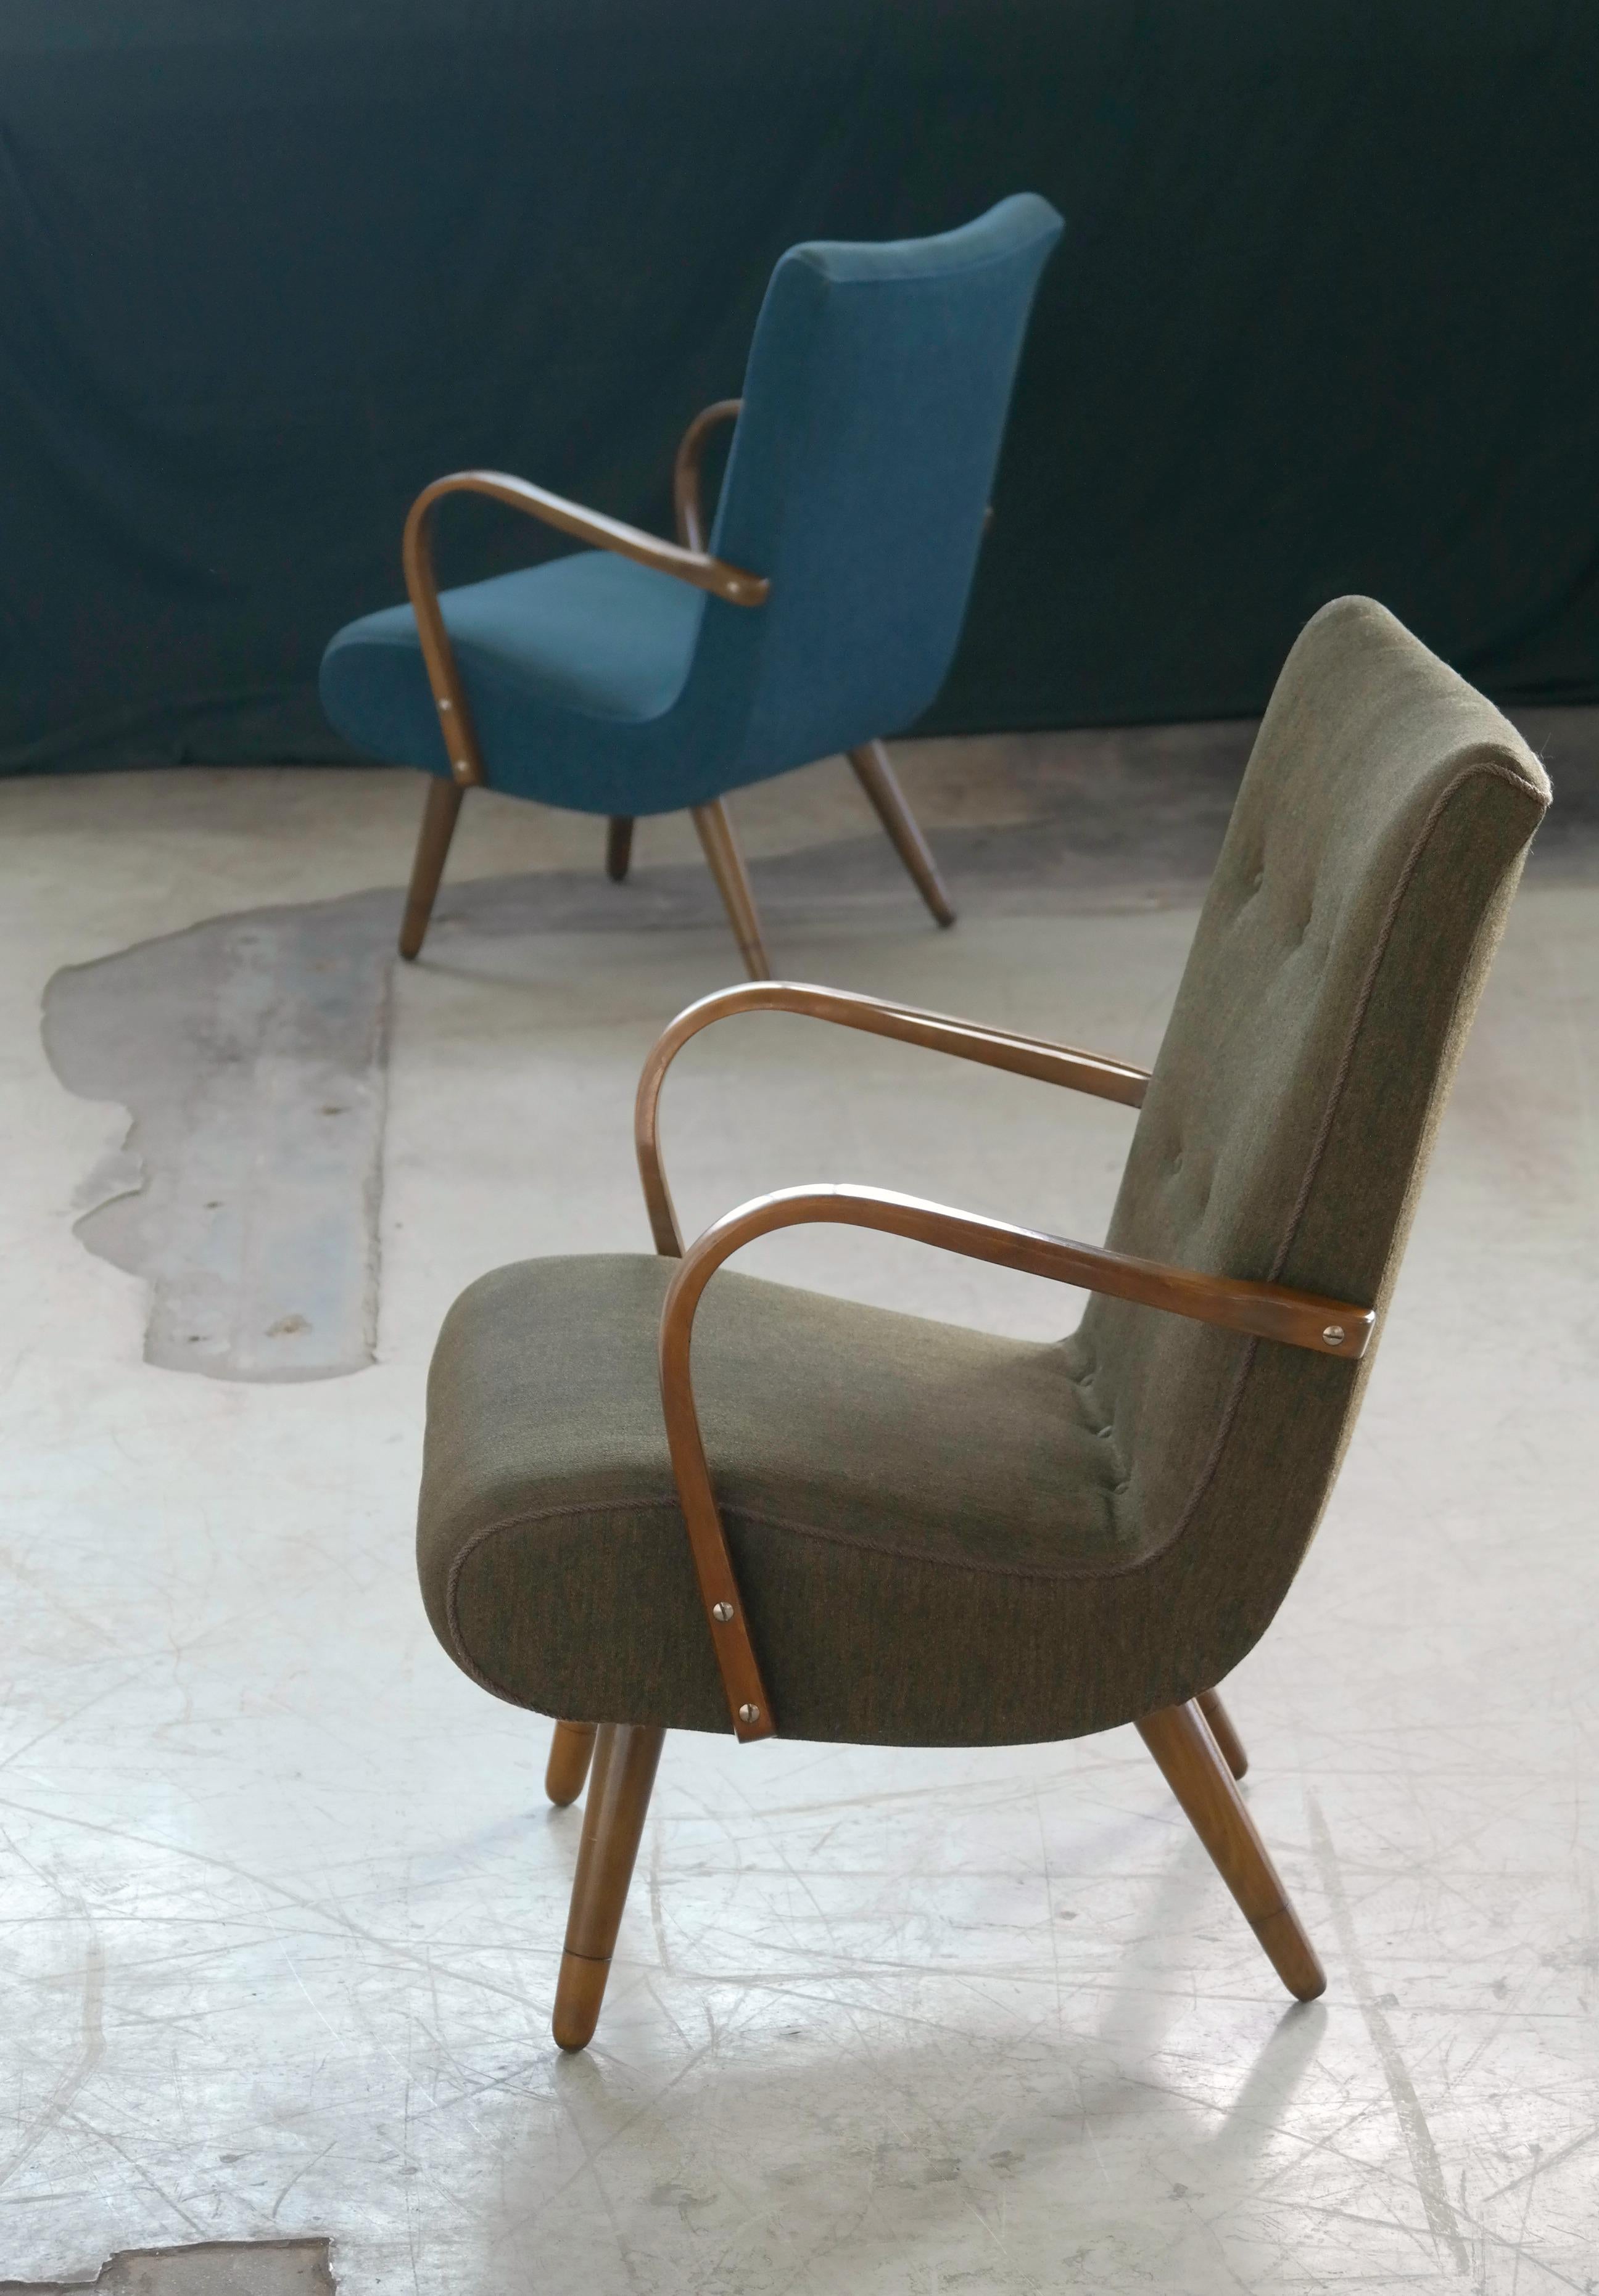 Pair of Danish 1950s Sculptural Lounge Chairs with Curved Wooden Armrests 1